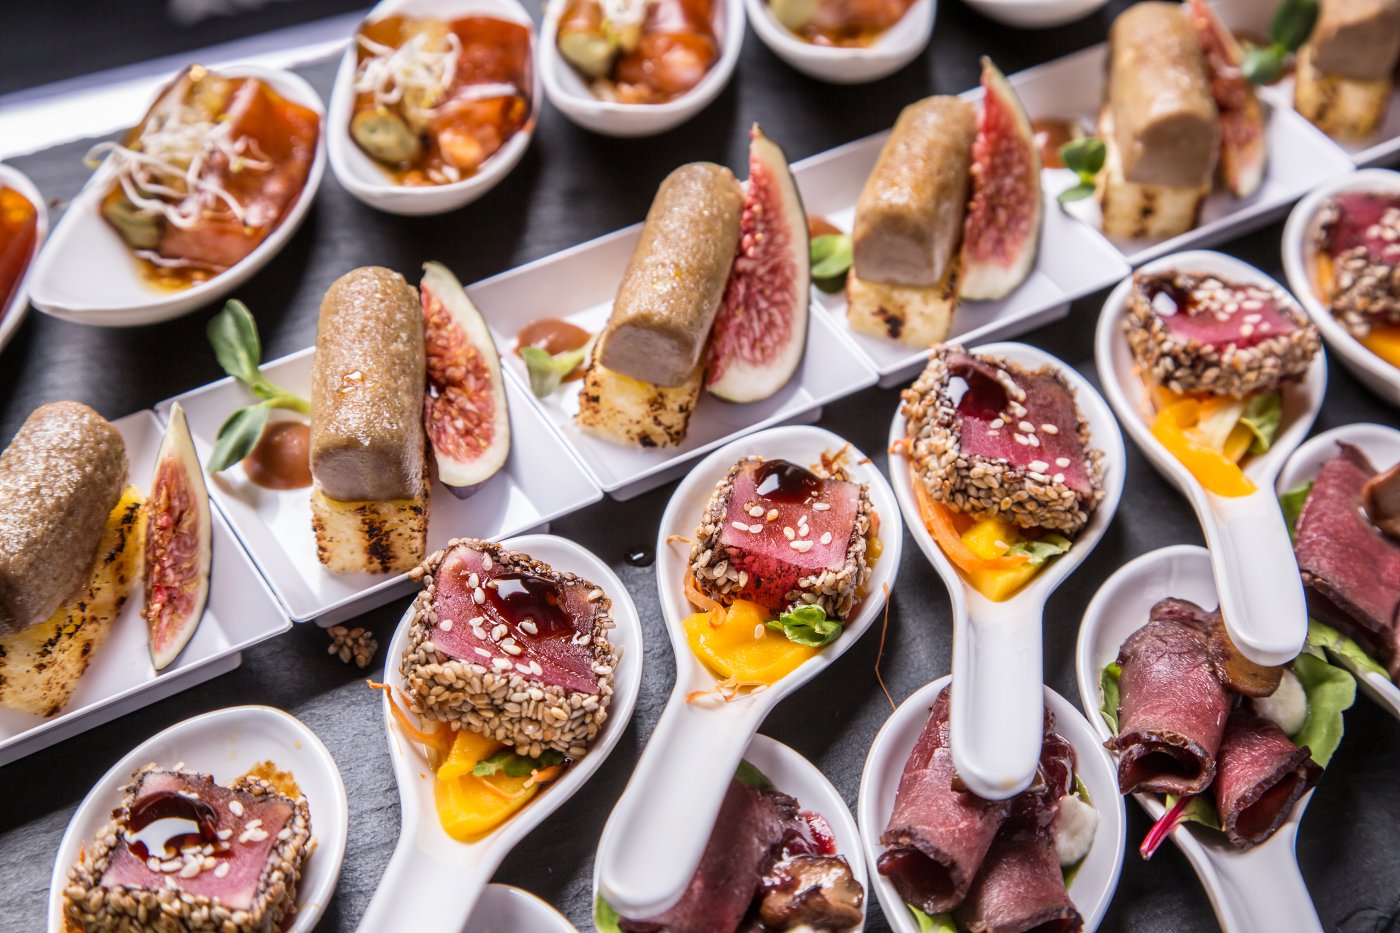 Large presentation spoons containing a selection of roast beef appetisers cooked rare and accompanied with sesame seeds and extravagant fruits